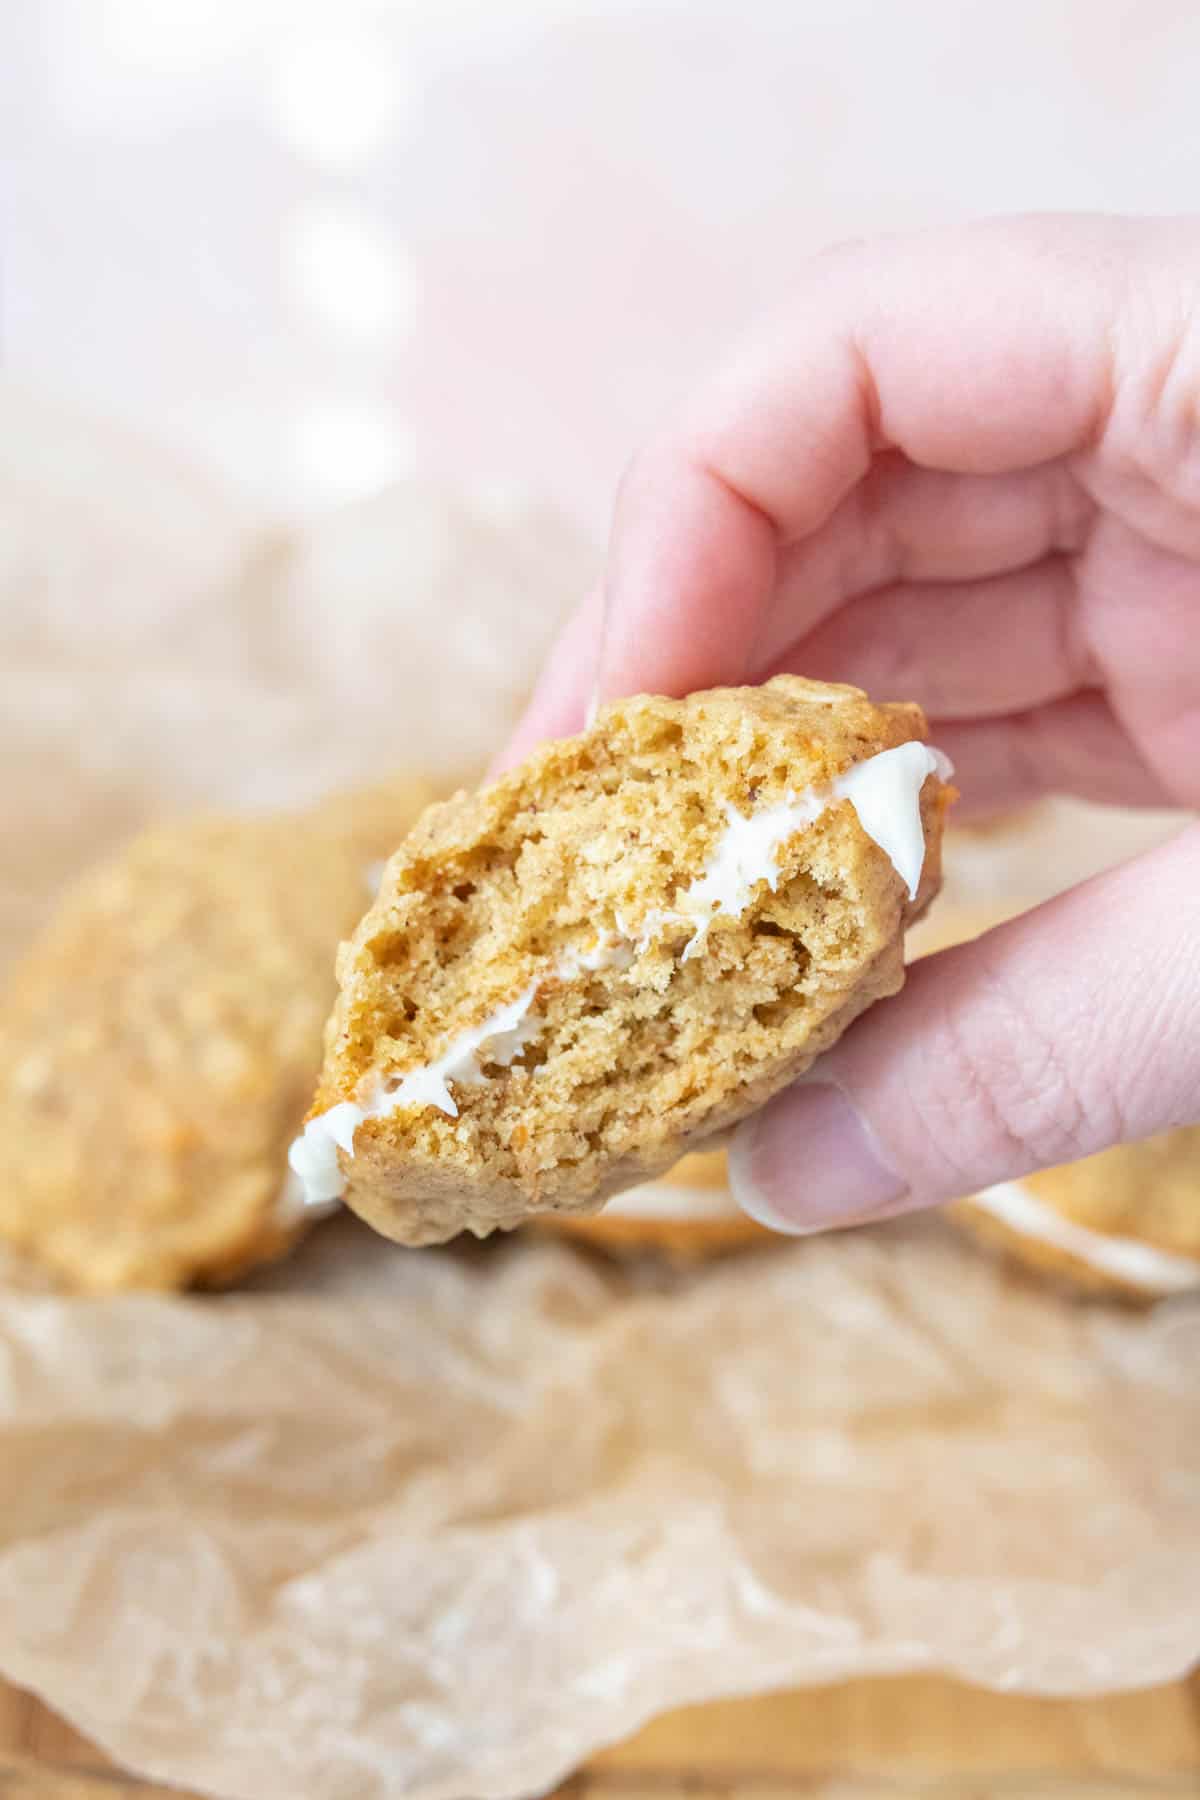 Caucasian hand holding carrot cake cookie with bite taken to show interior.